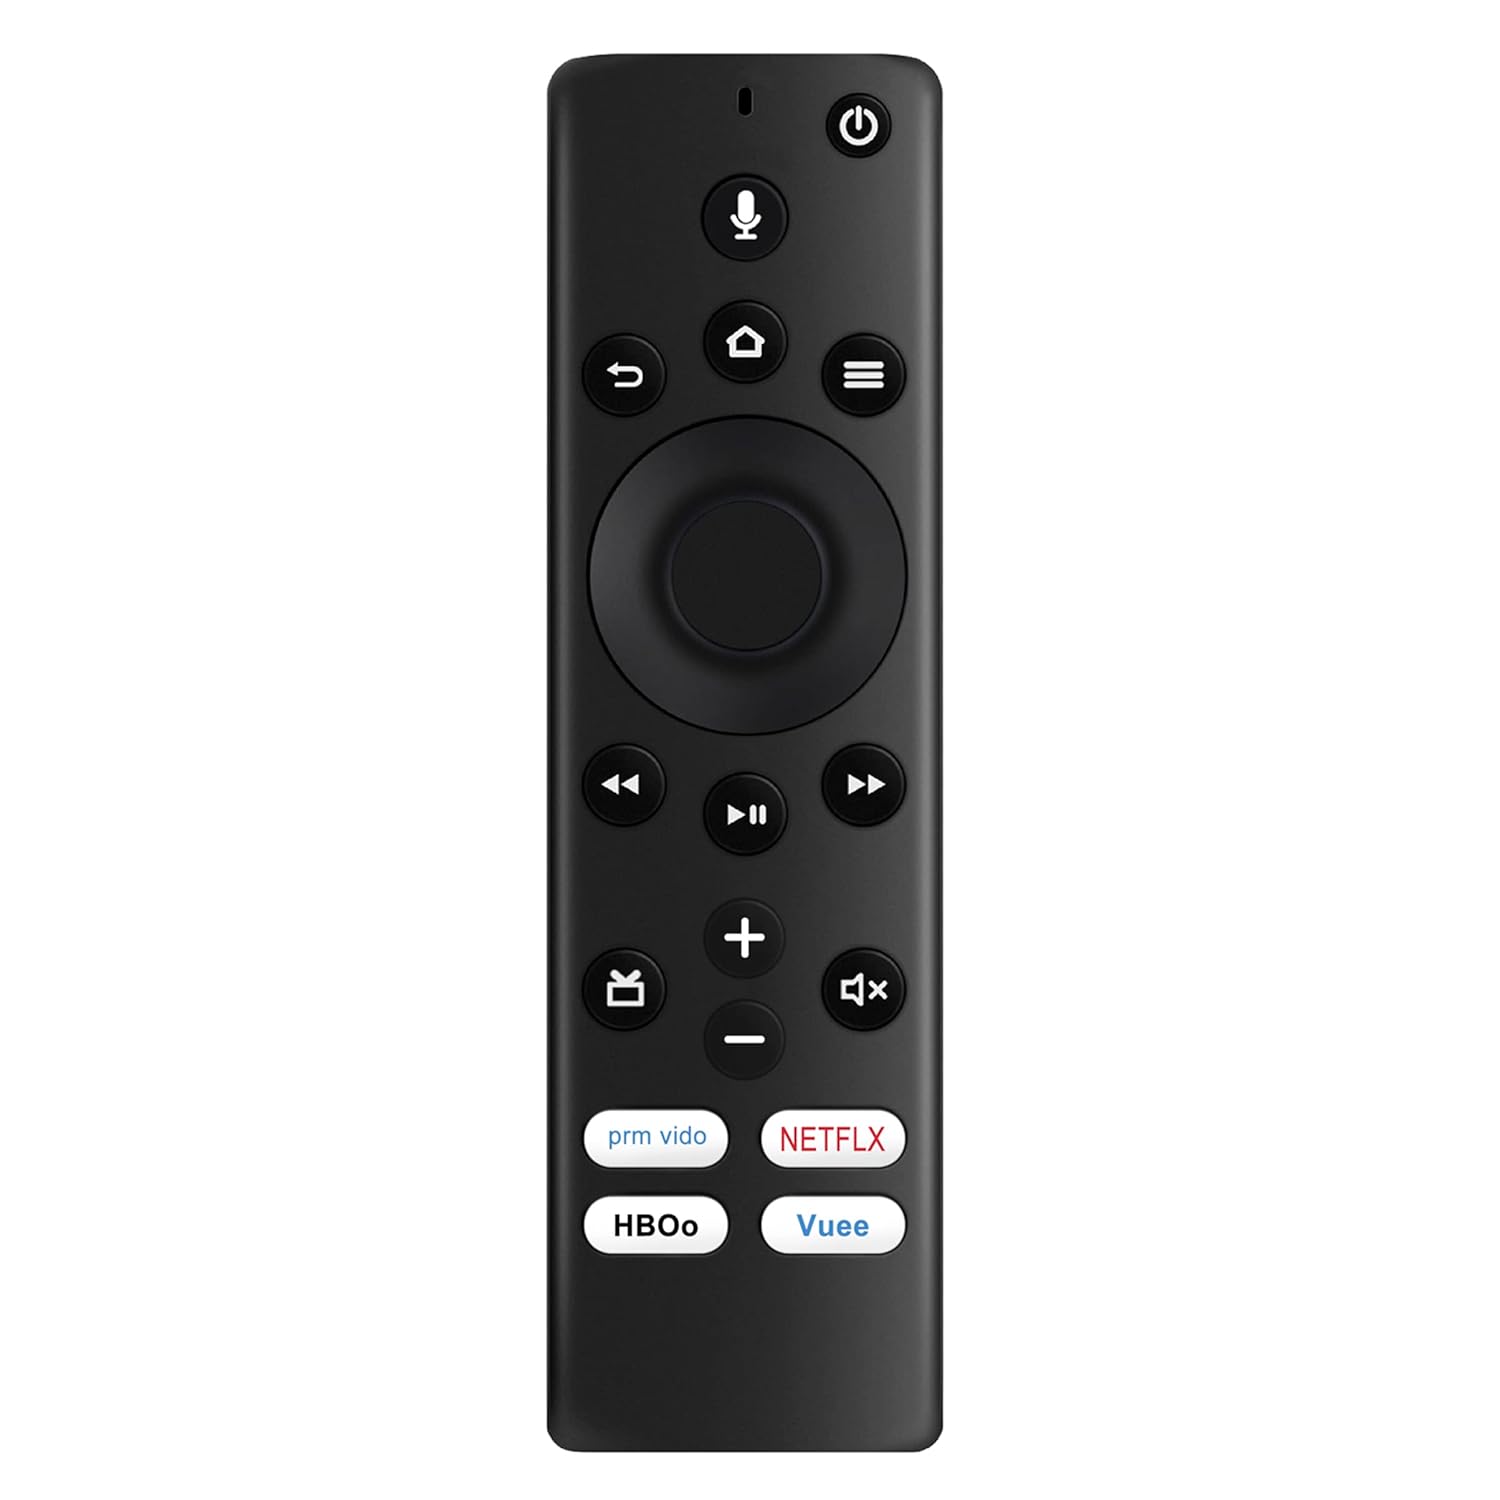 thinkstar Replaced Voice Remote Control Compatible With Insignia Fire Tv Nsrcfna19 Ns24Df310Na19 Ns32Df310Na19 Ns39Df510Na19 Ns43Df710N…